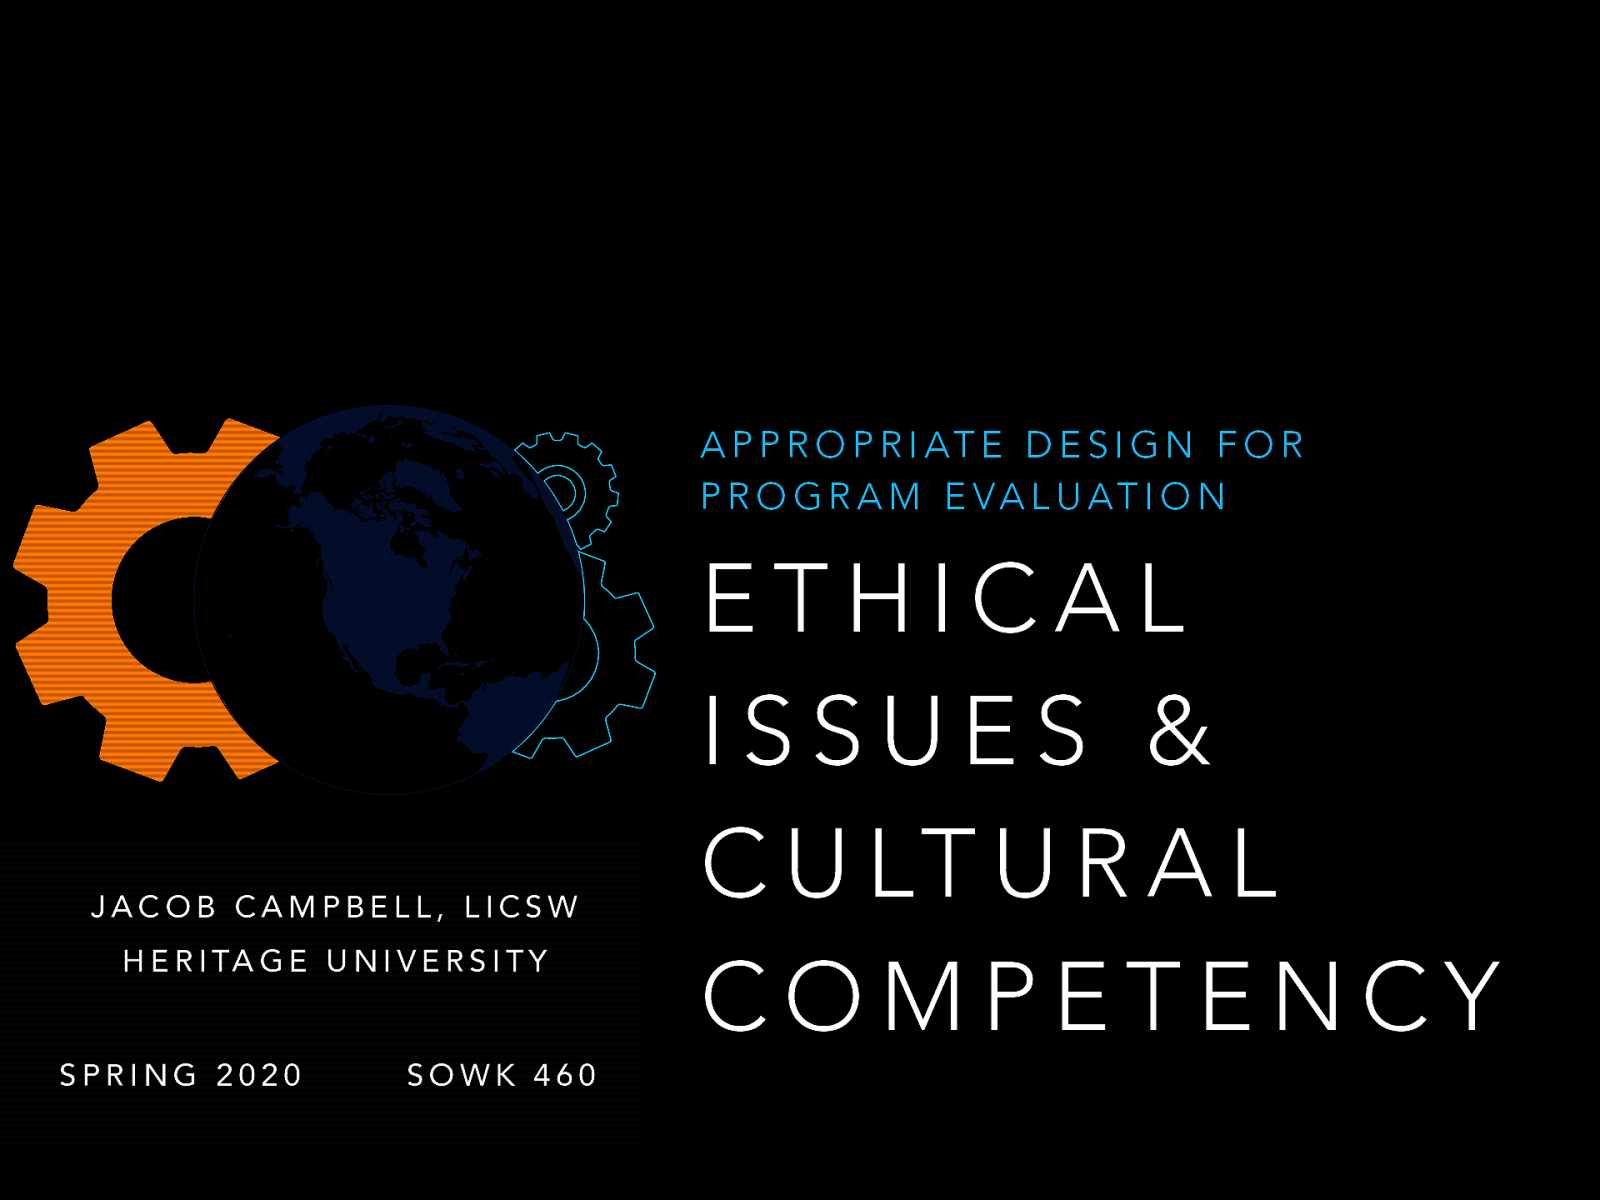 Week 05 - Ethical Issues & Cultural Competency